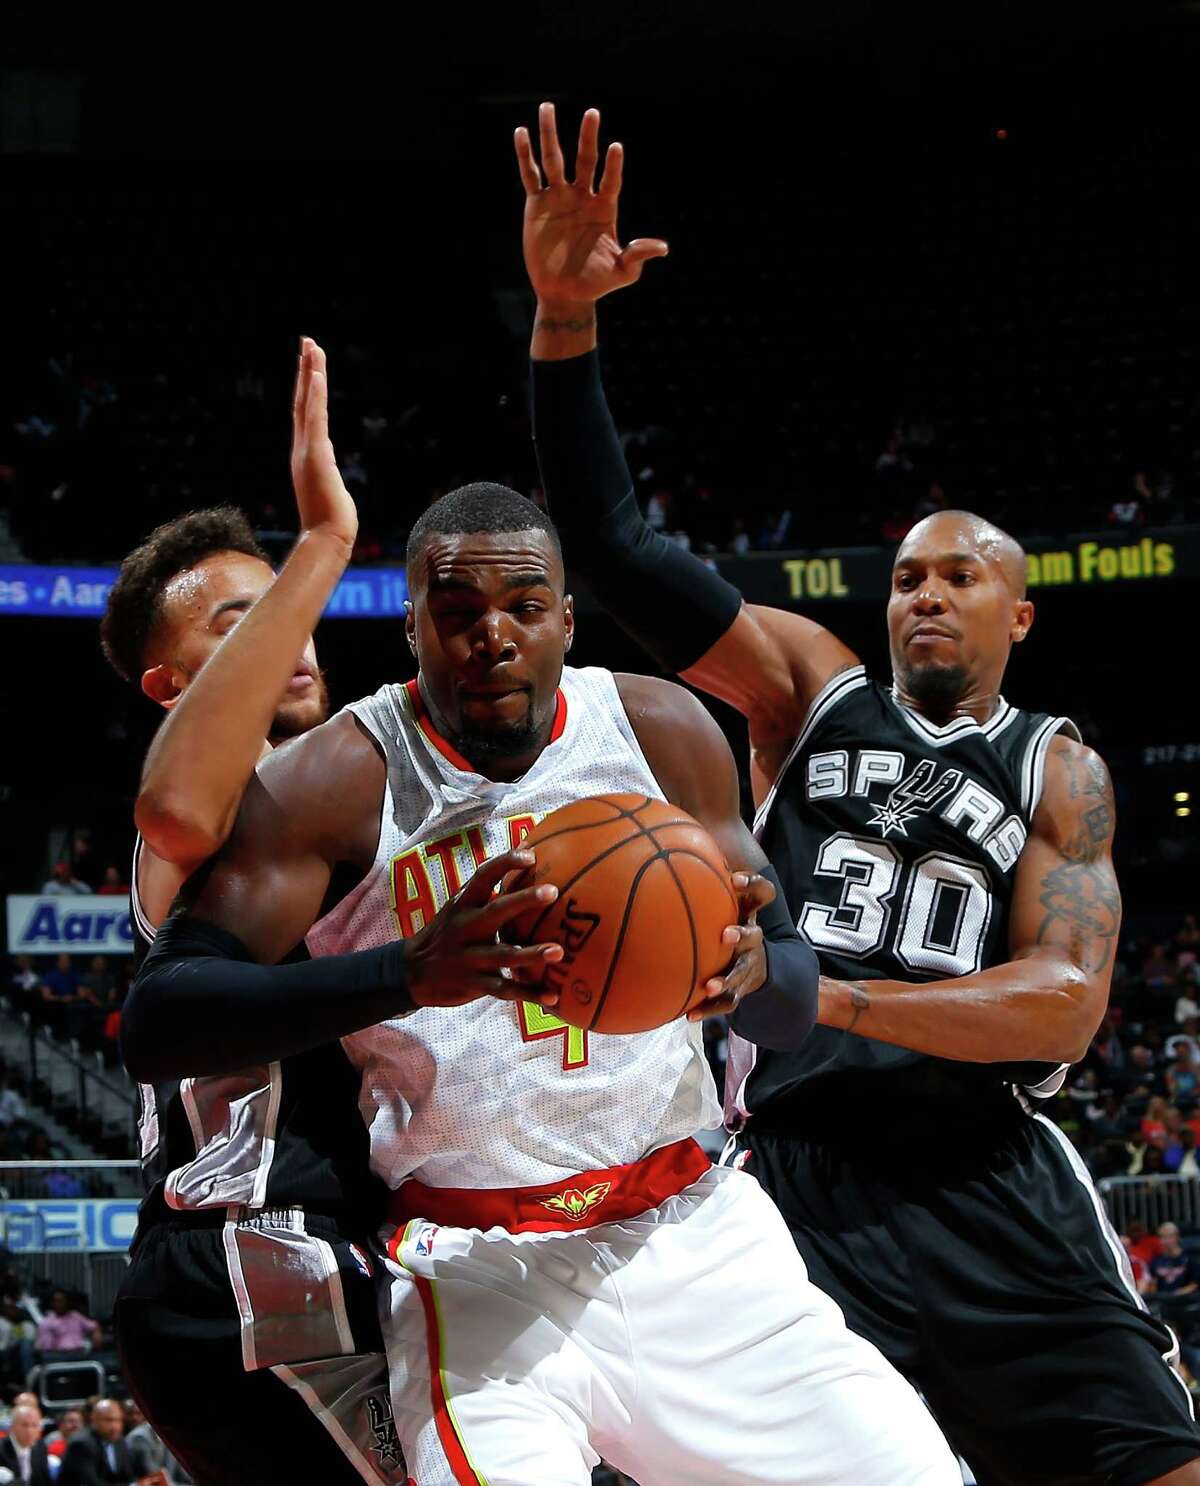 ATLANTA, GA - OCTOBER 14: Paul Millsap #4 of the Atlanta Hawks drives against Kyle Anderson #1 and David West #30 of the San Antonio Spurs at Philips Arena on October 14, 2015 in Atlanta, Georgia. NOTE TO USER User expressly acknowledges and agrees that, by downloading andor using this photograph, user is consenting to the terms and conditions of the Getty Images License Agreement.